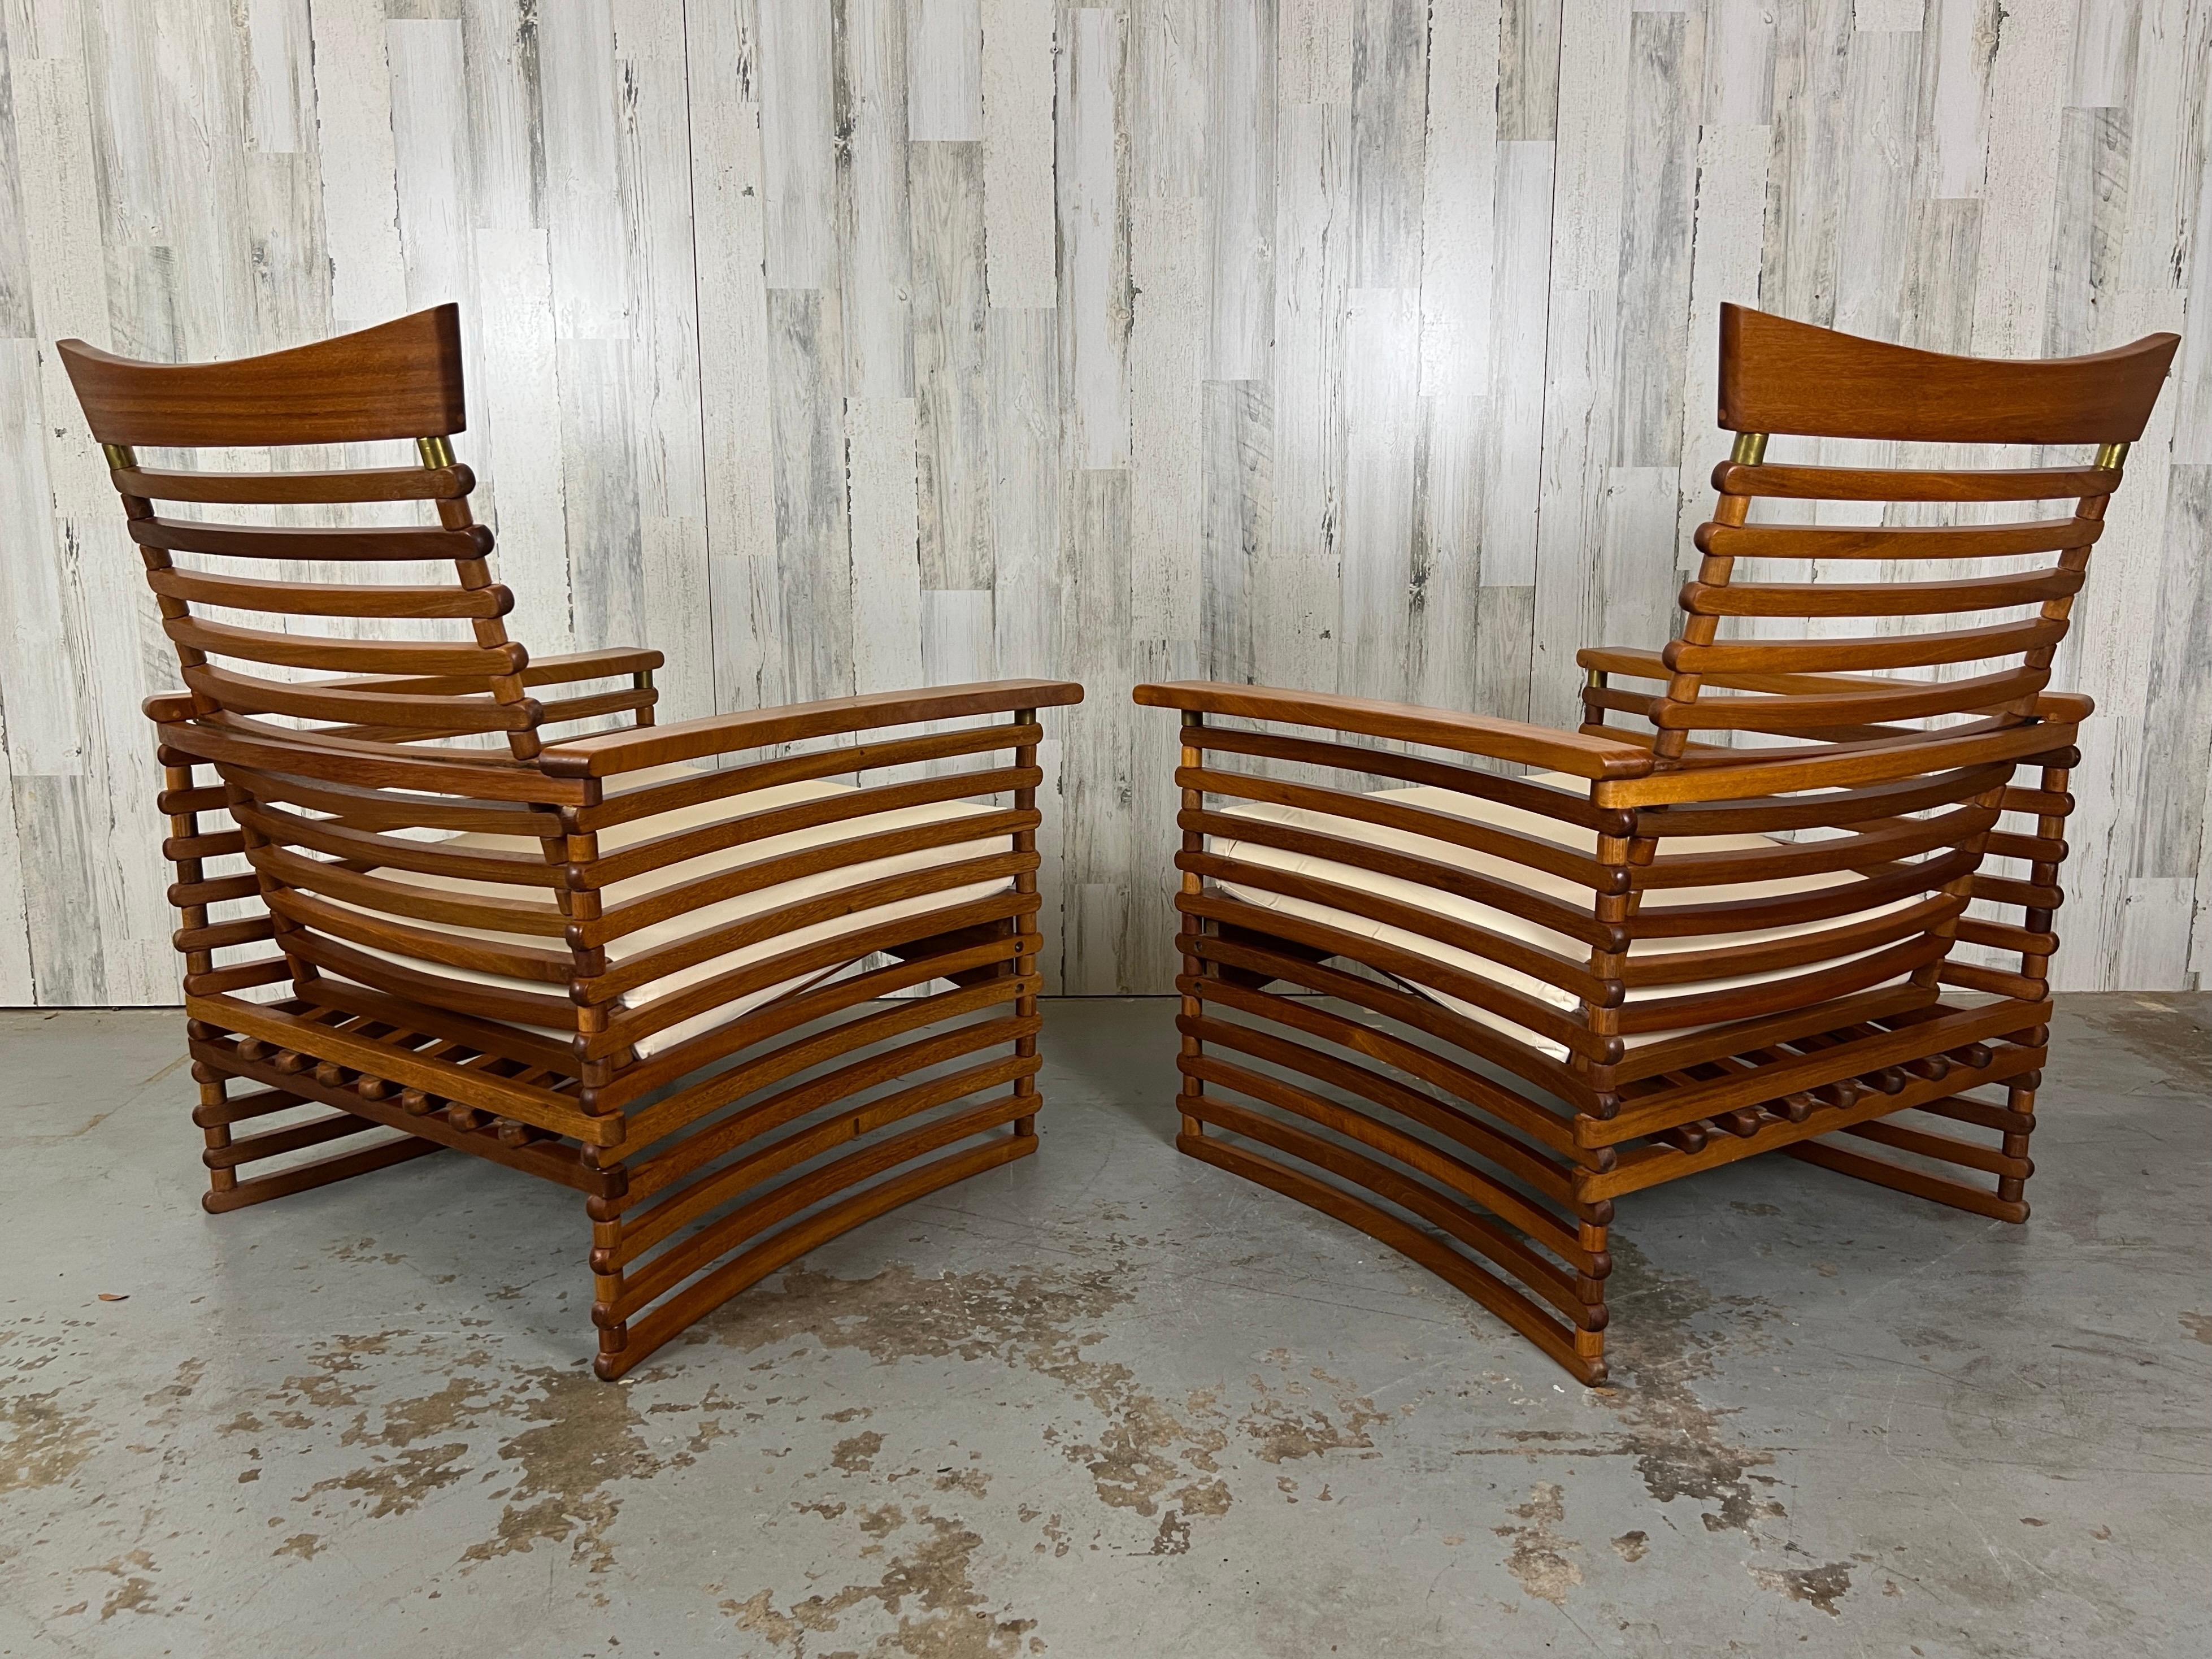 Vintage Slatted Teak Lounge Chairs In Good Condition For Sale In Denton, TX